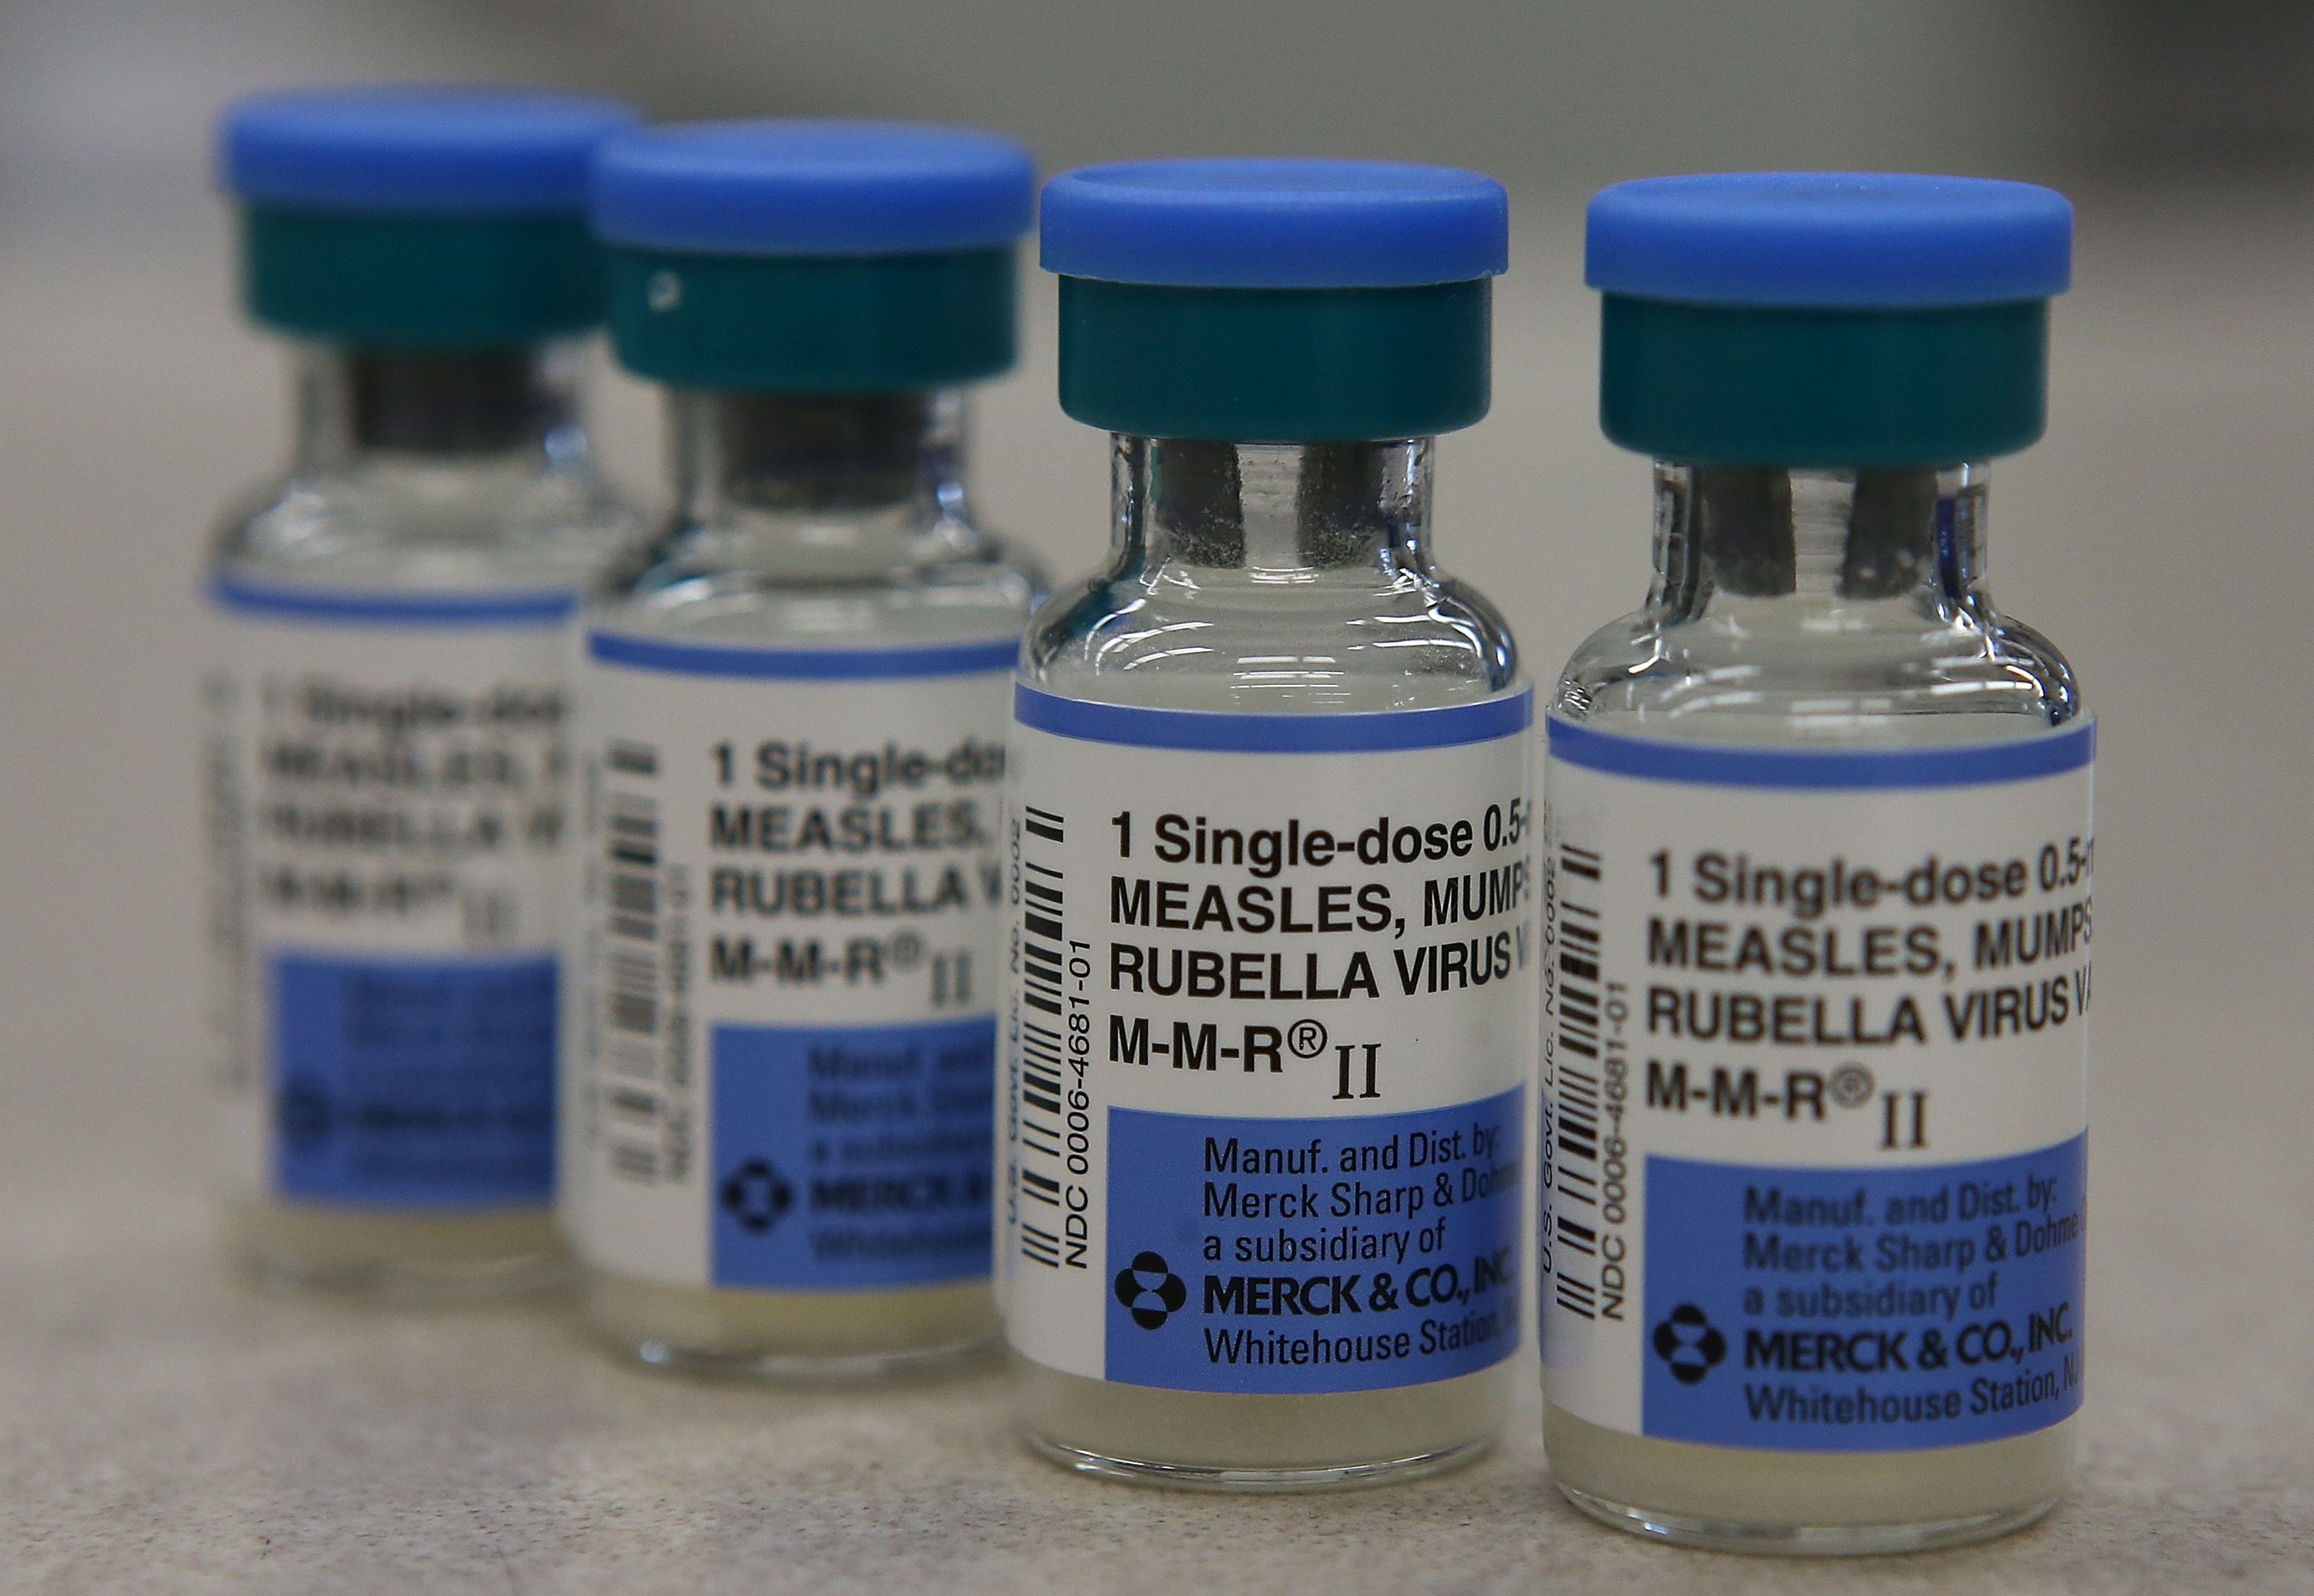 US measles outbreak spreads to Maine, 25th state to report case